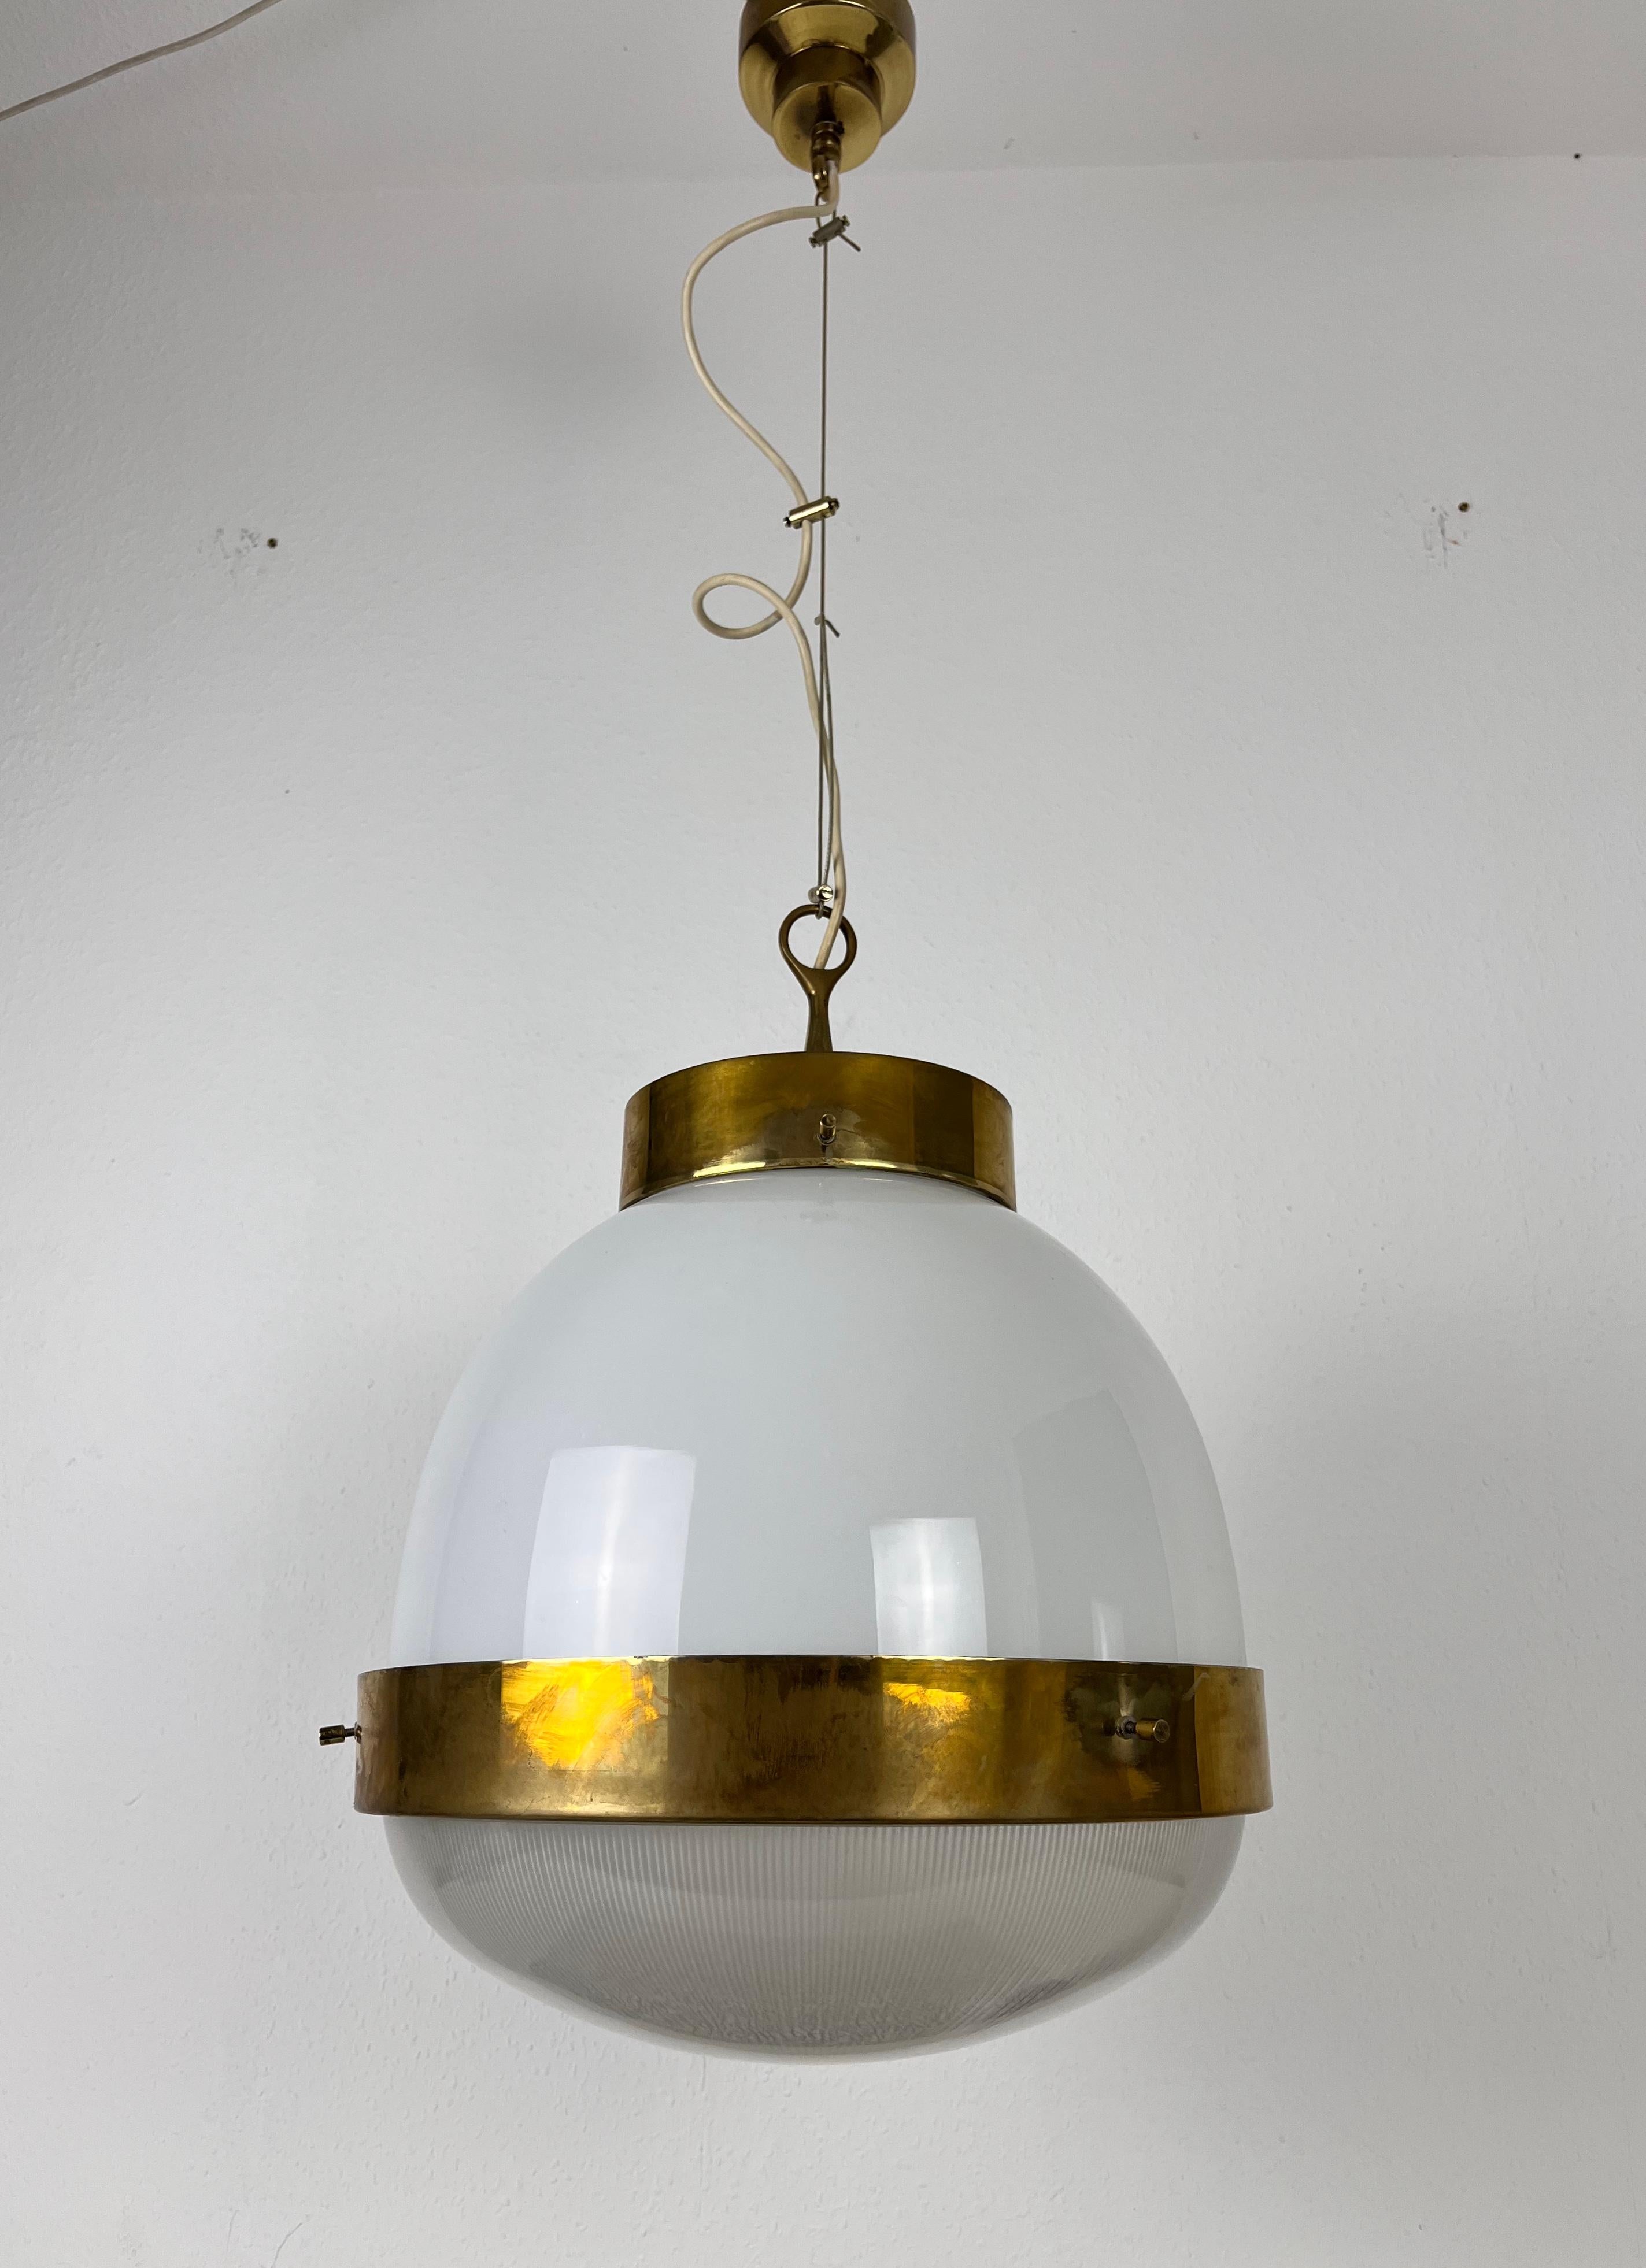 Delta chandelier by Sergio Mazza for Artemide made in Italy in the 1960s. It is fascinating with its glass shape and wonderful brass elements.

Dimensions
Height: 40-105 cm
Diameter: 35 cm

The light requires one E27 (US E26) light bulb in the